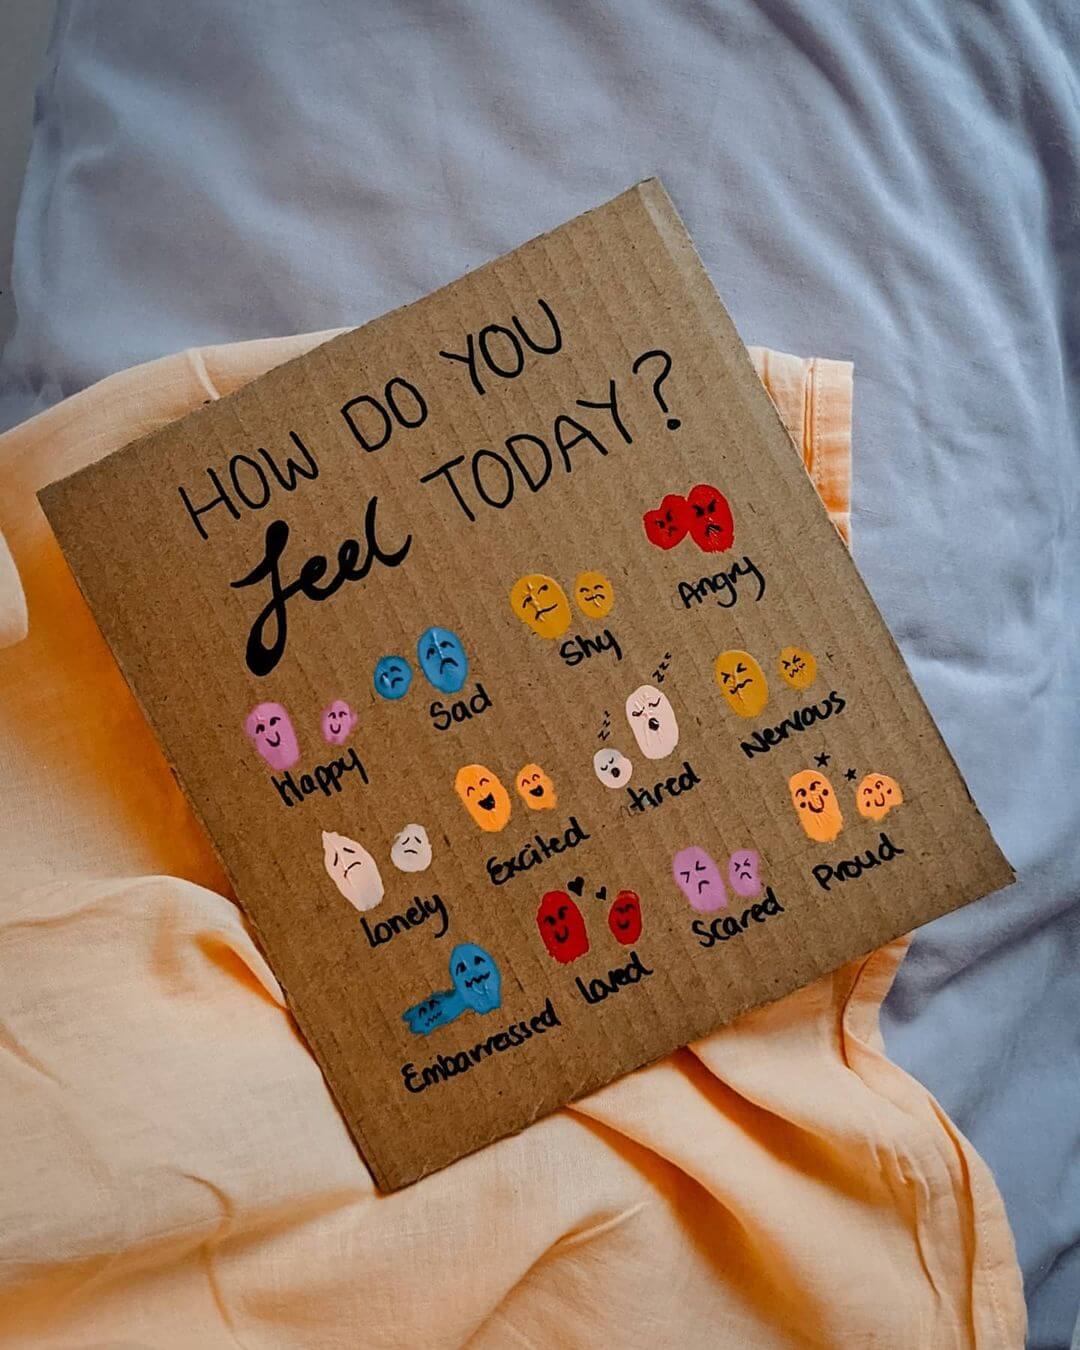 A piece of cardboard with a feelings chart drawn on with twelve colours and cartoon faces to show the emotions.